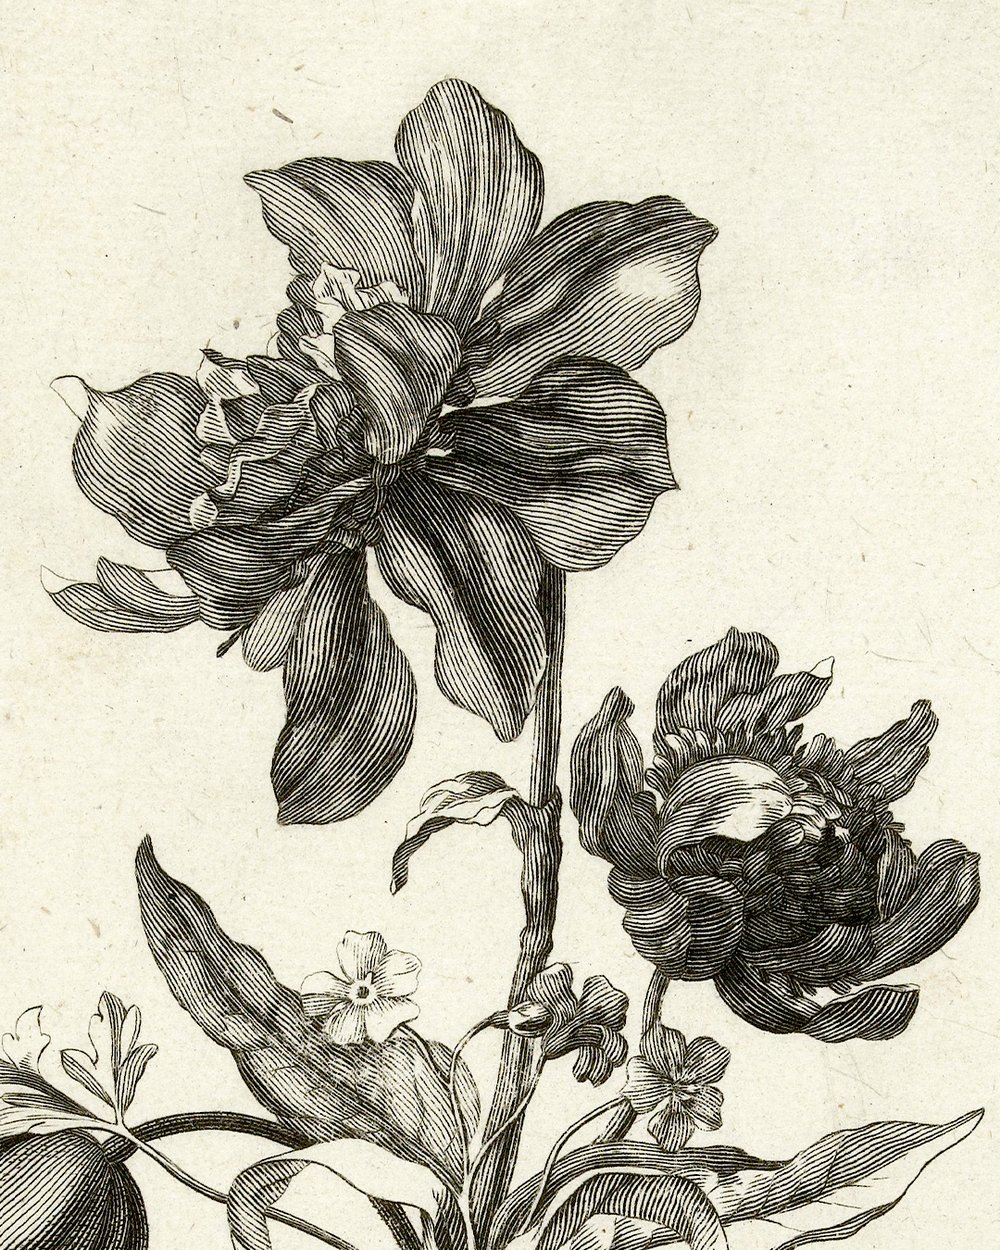 "Four flowers, including an anemone" (1700 - 1800)